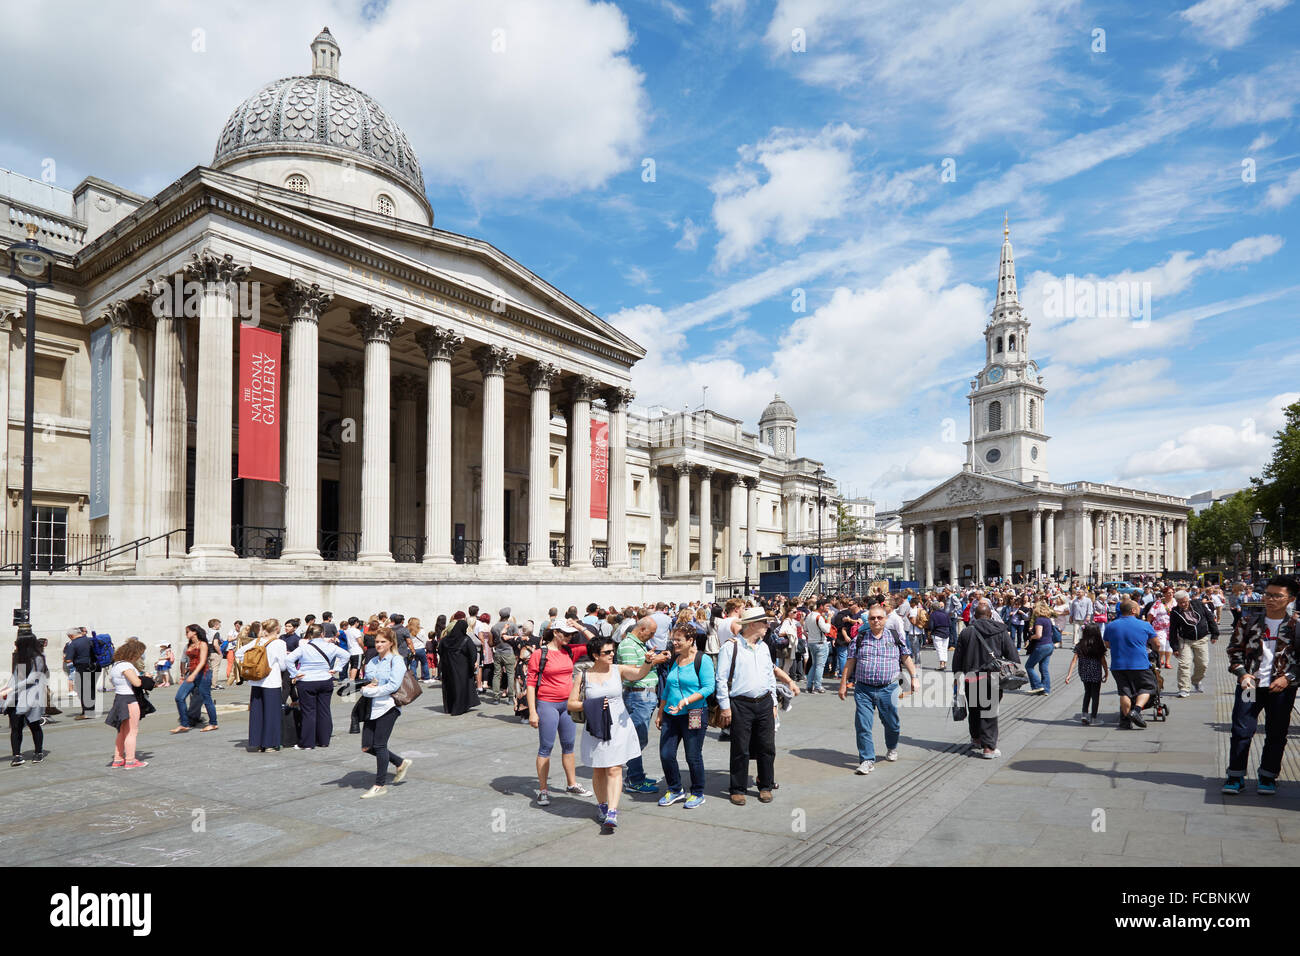 The National Gallery at Trafalgar Square in London in a sunny afternoon, crowd of tourists Stock Photo